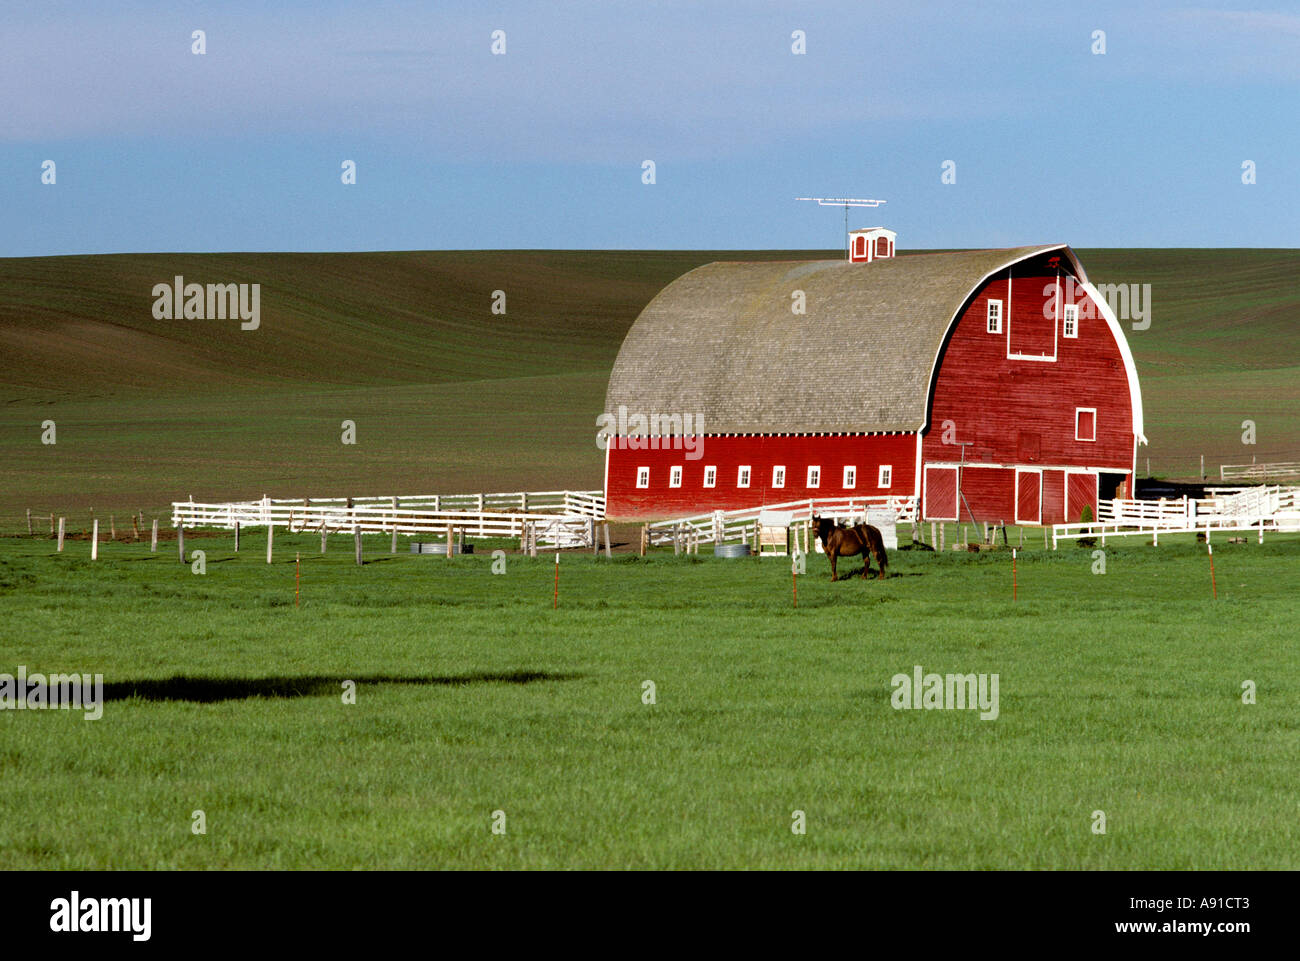 Red barn on a farm in Northern Idaho near Moscow. Stock Photo